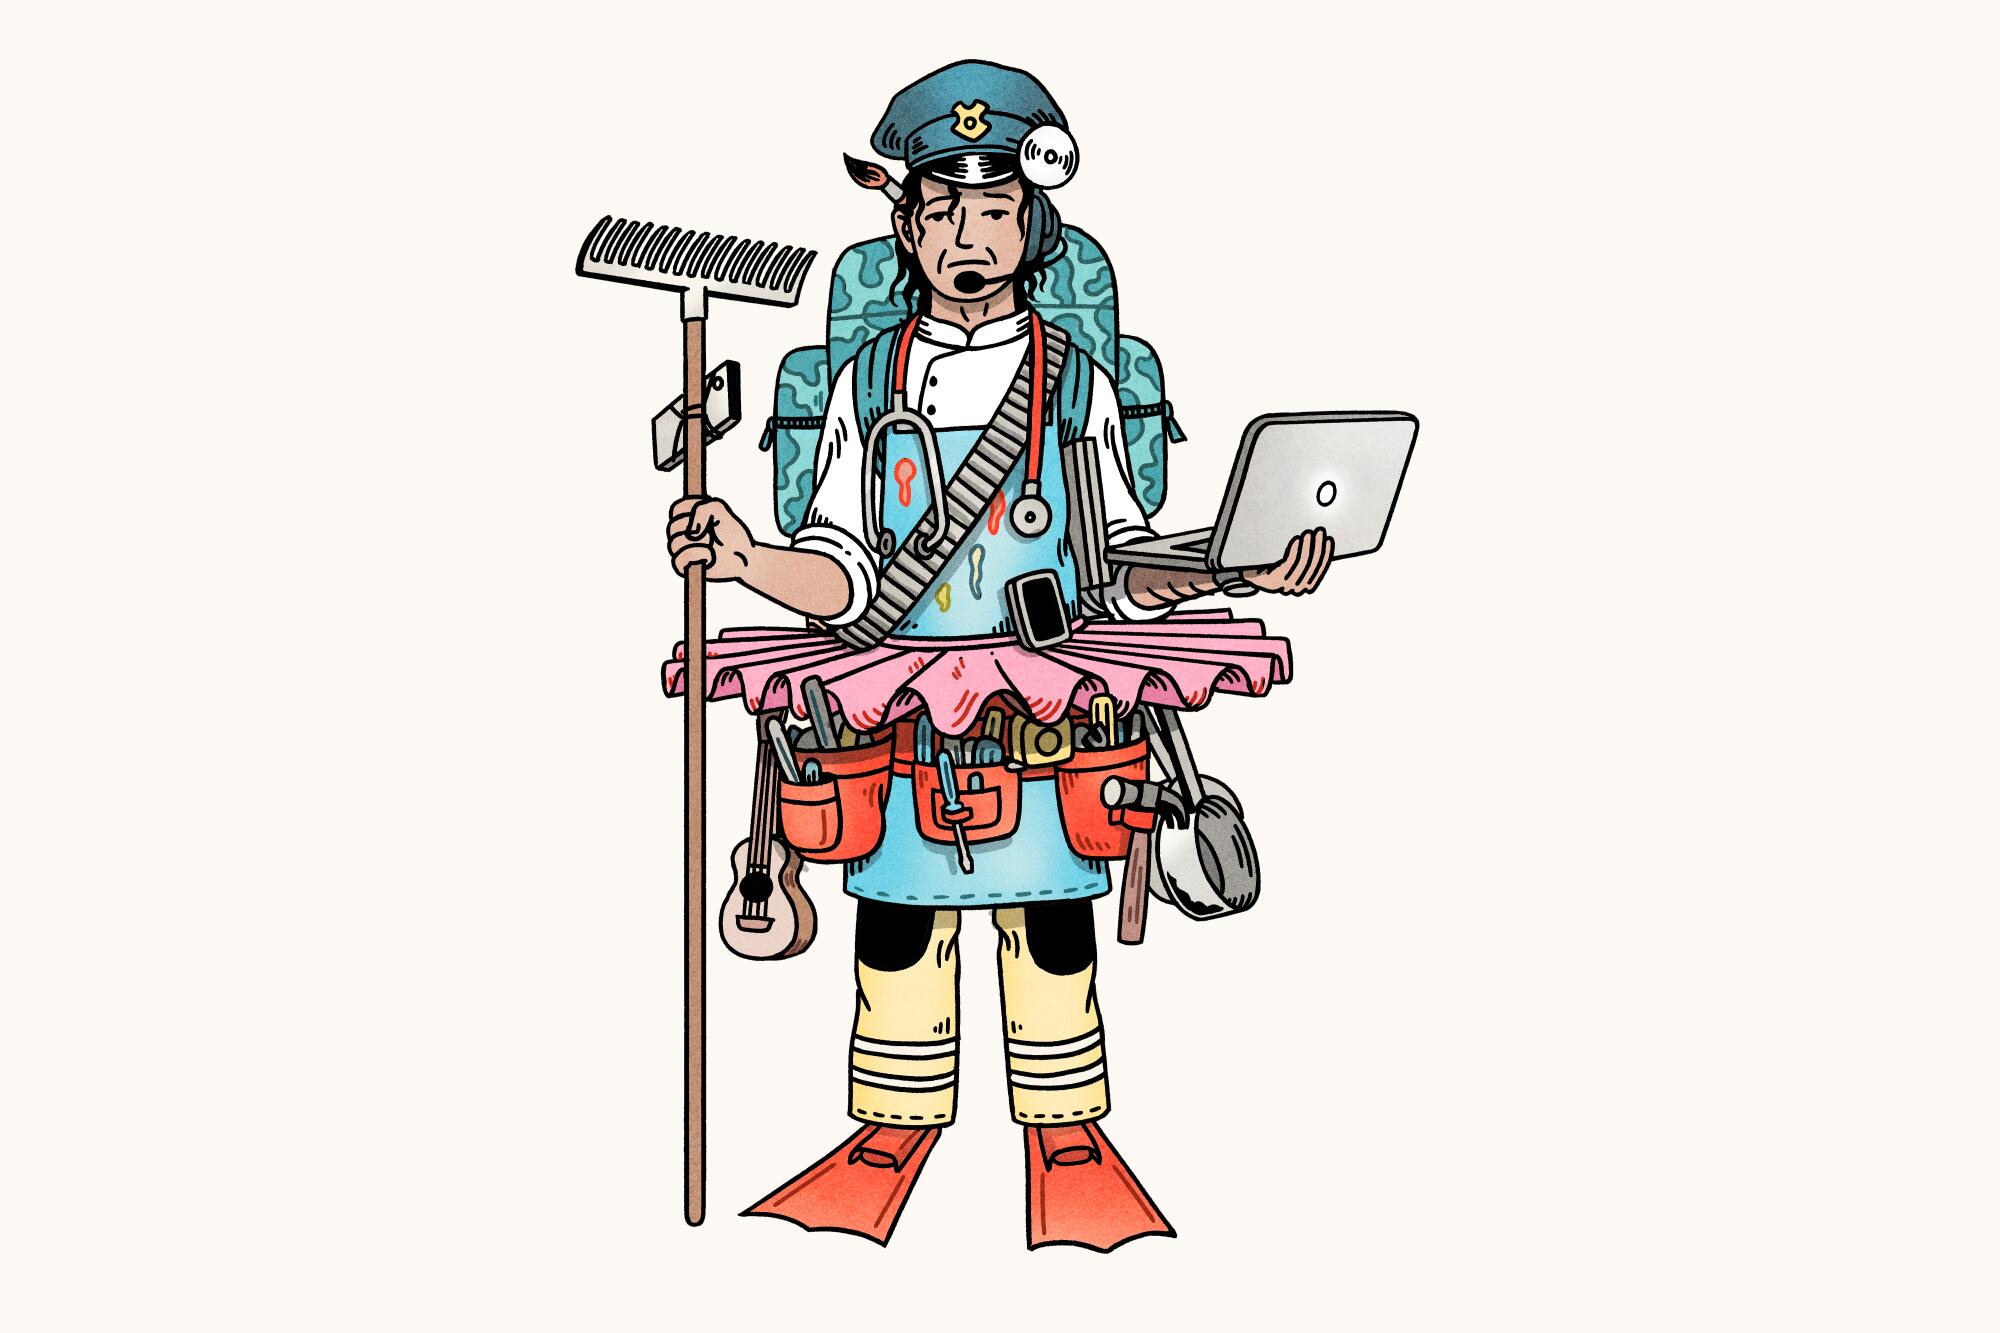 Illustration of a person wearing the equipment needed for many jobs including an apron, tool belt and gadgets.